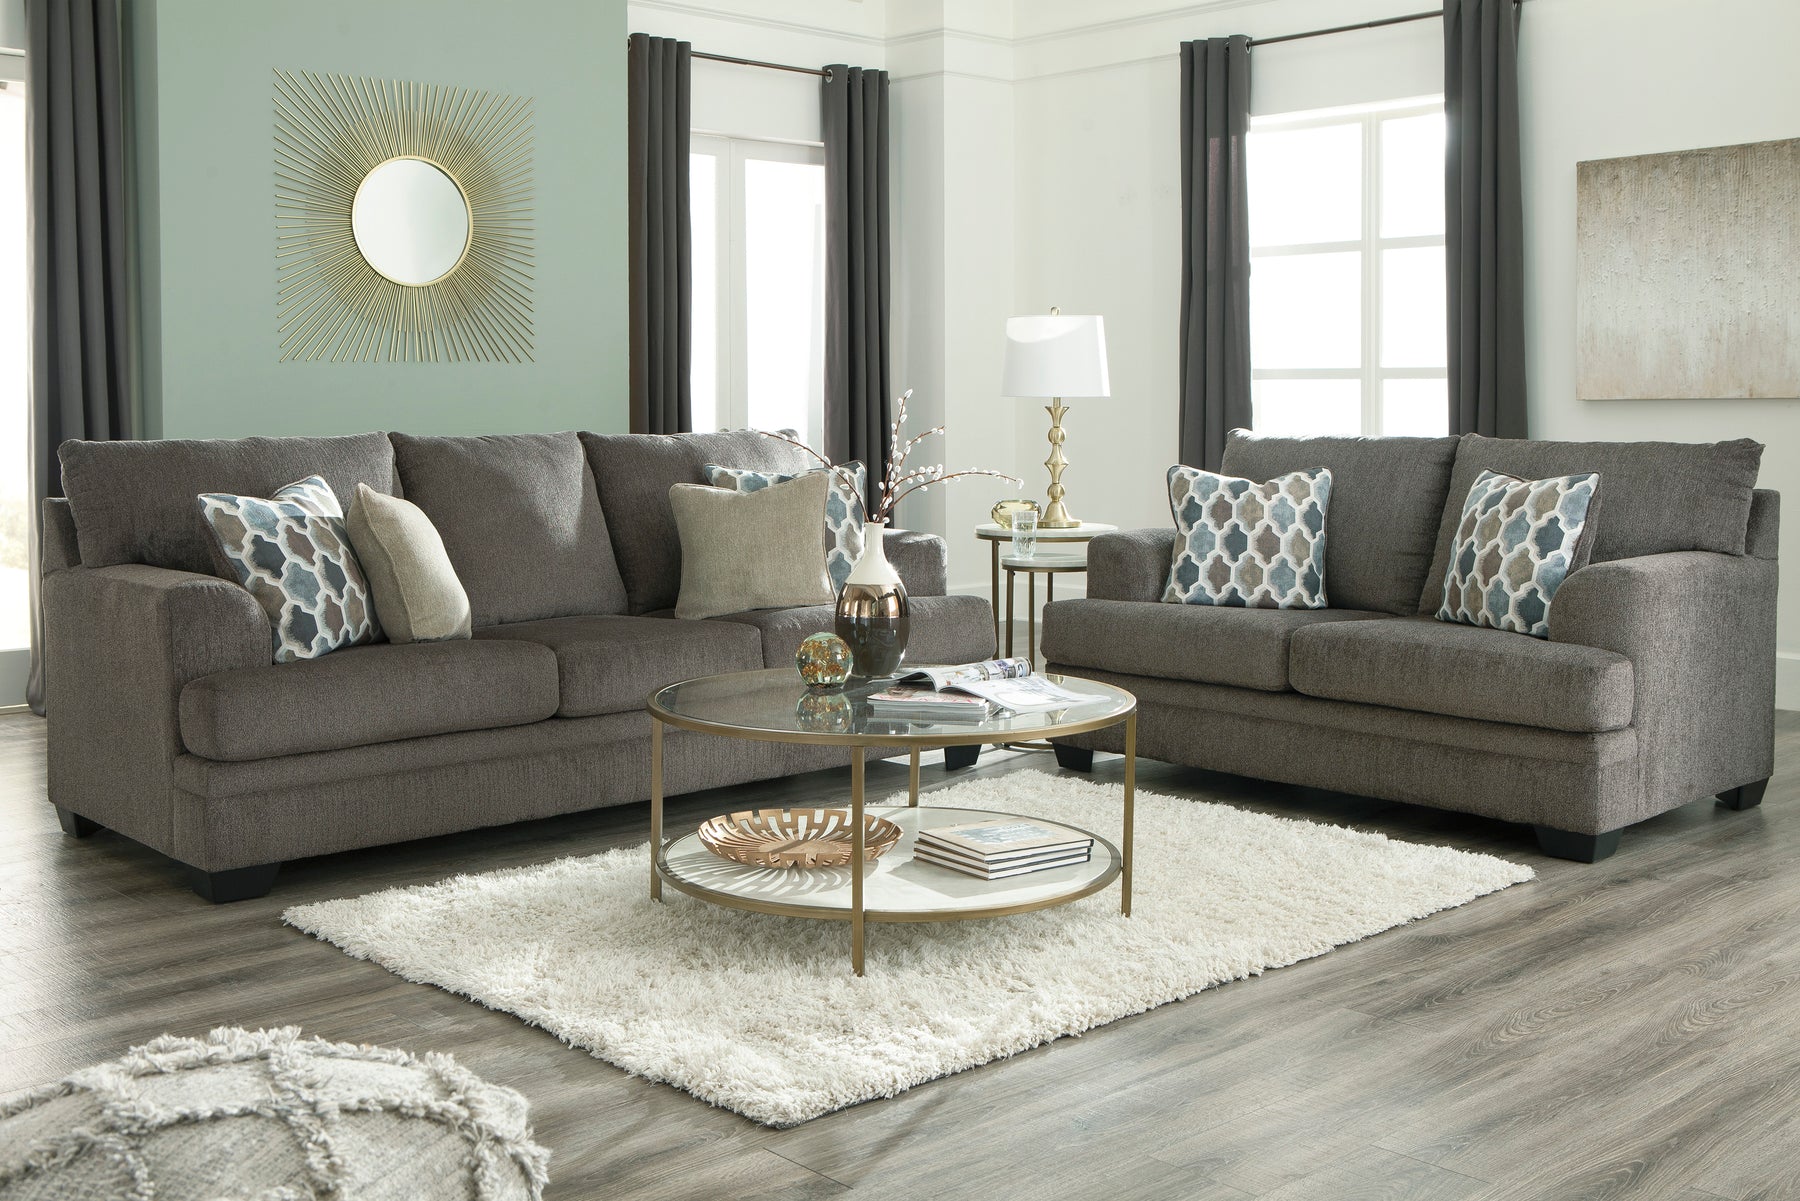 Discover the Comfort and Style of Ashley Furniture's Dorsten Collection